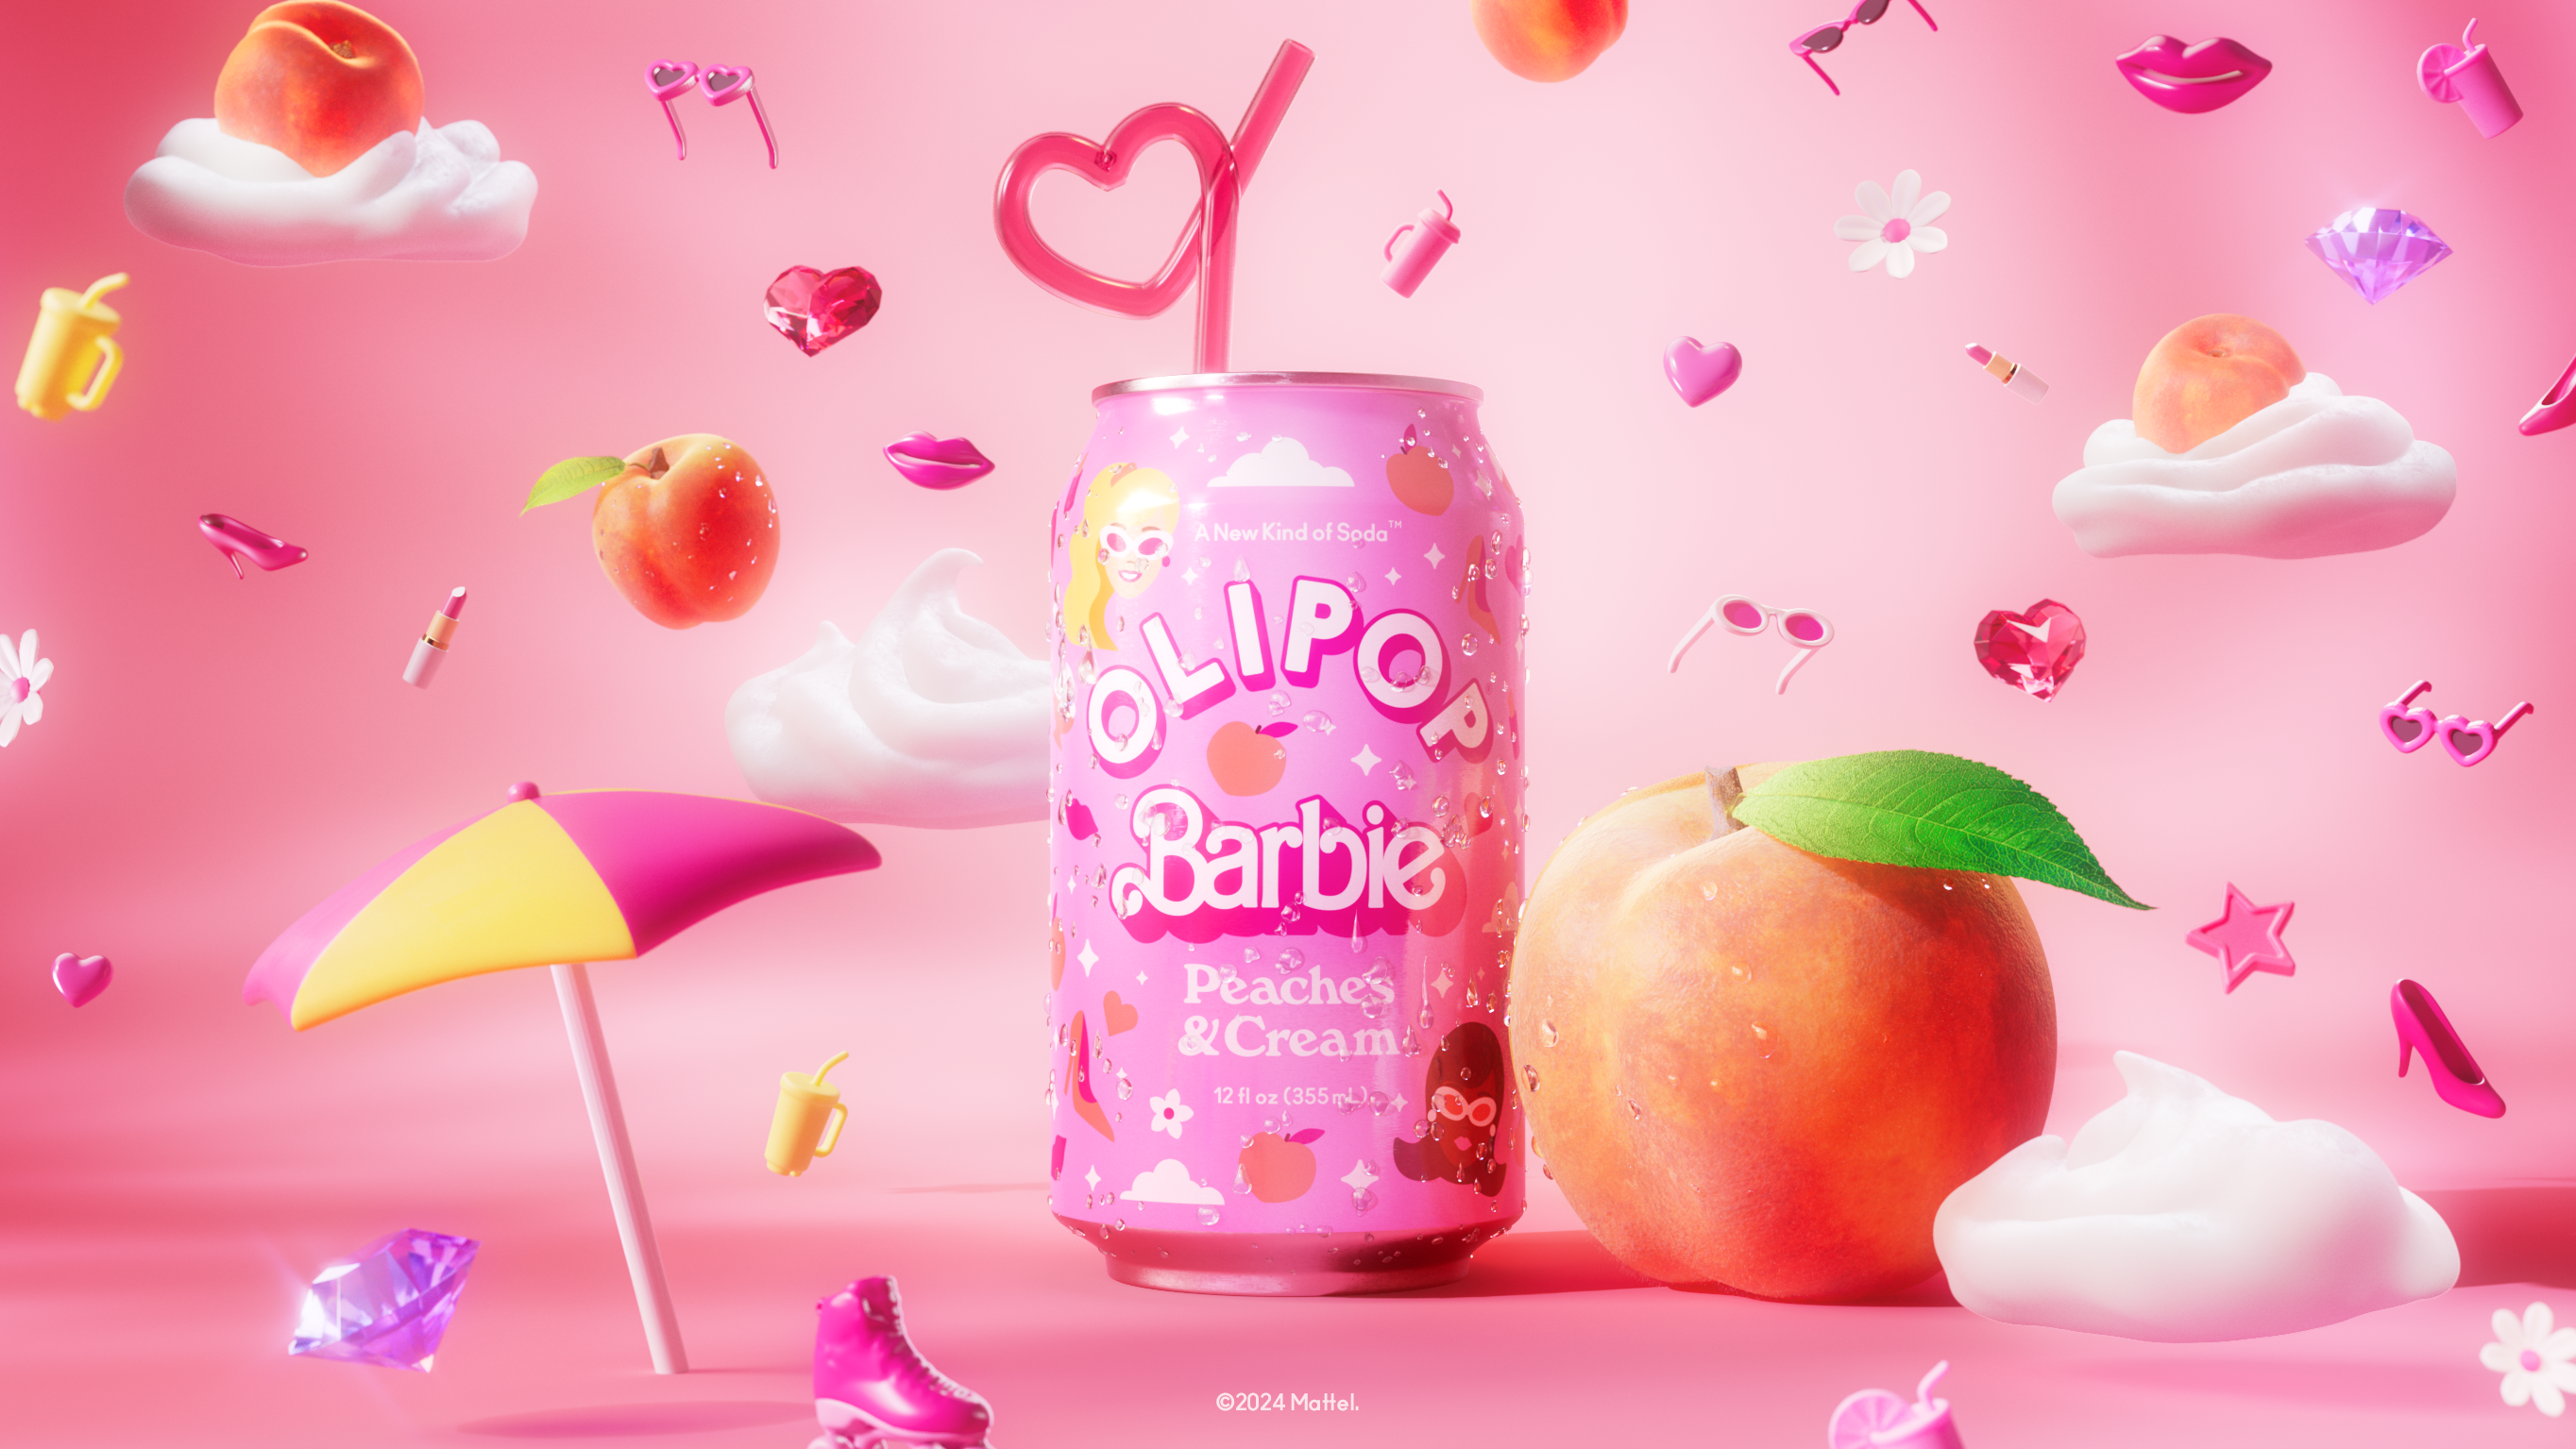 OLIPOP and Barbie Collab For 65th Anniversary of Peaches and Cream Barbie 